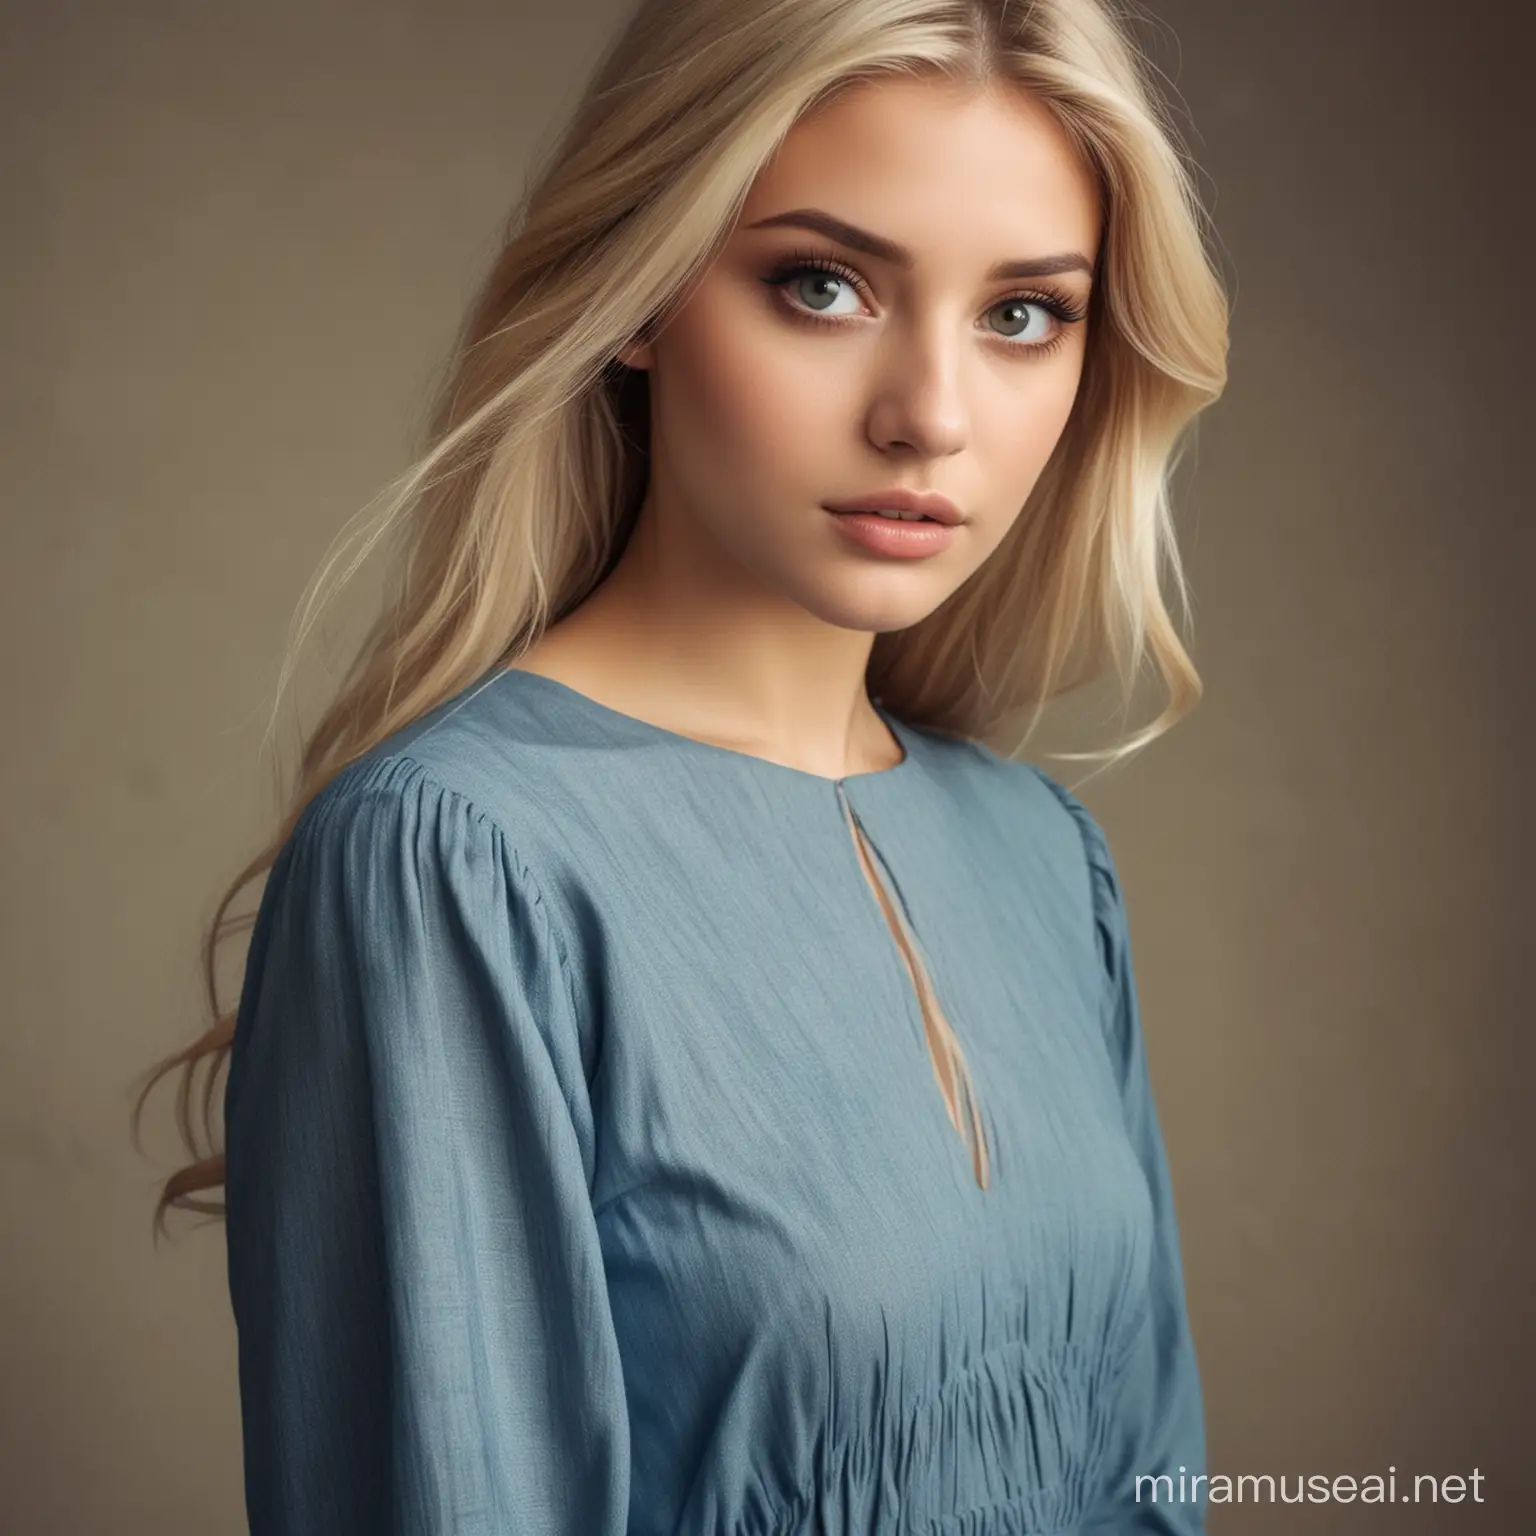 Scared Blonde Girl in Long Blue Dress with Brown Eyes and Long Eyelashes